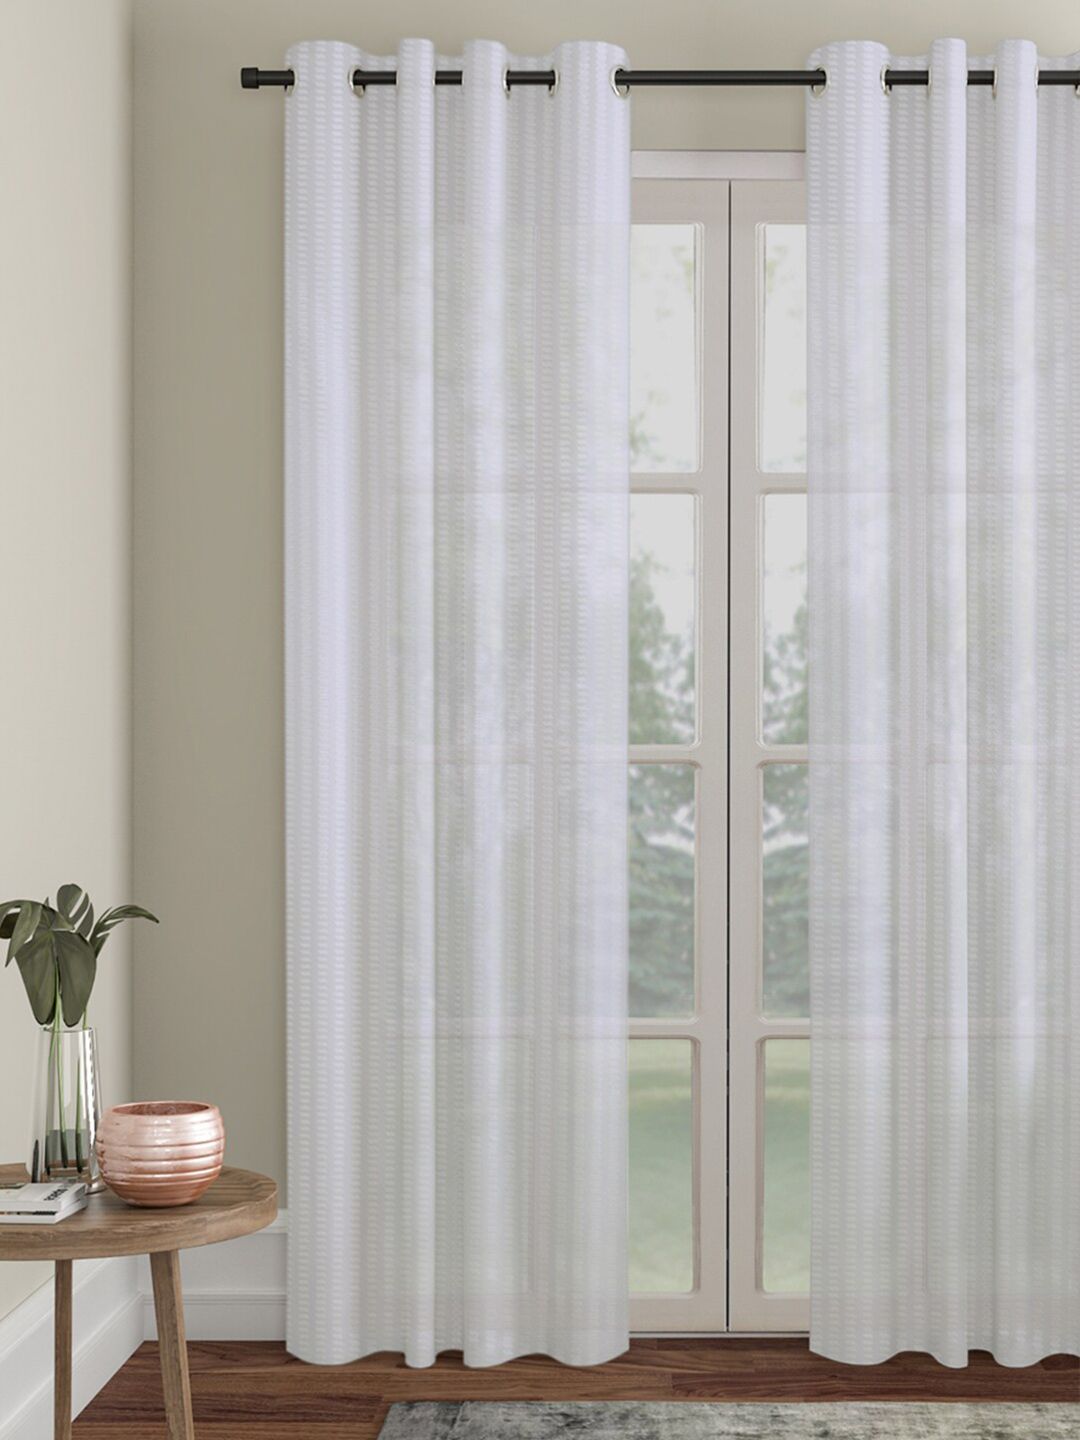 HOSTA HOMES White & Grey Striped Door Curtain Price in India